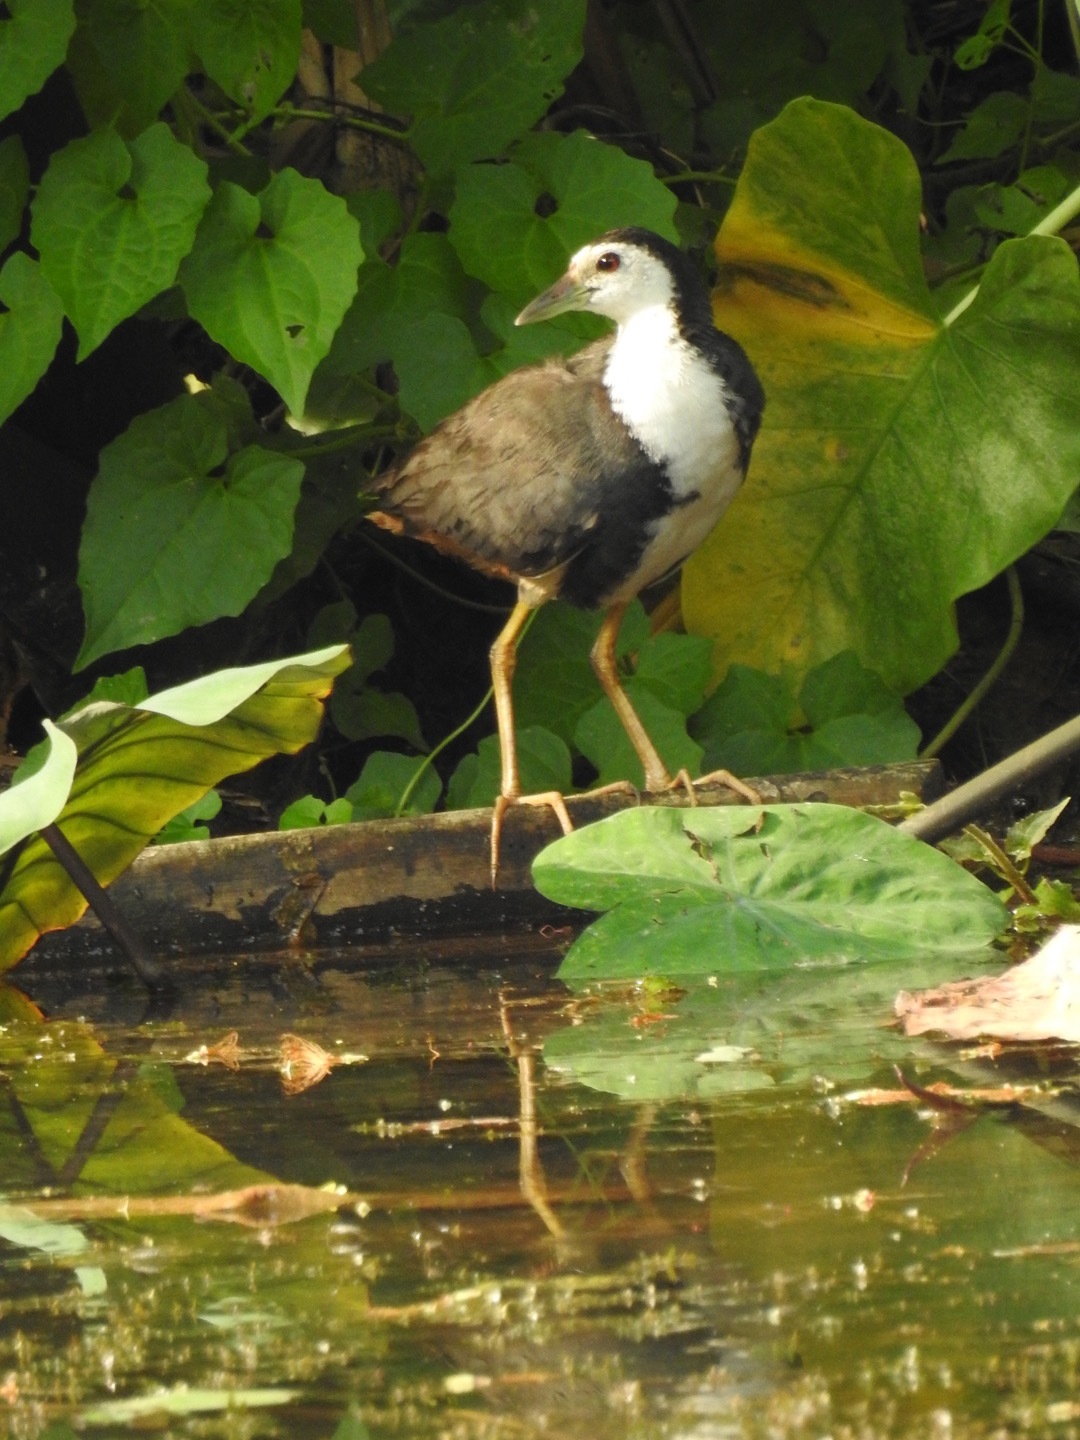 White-Breasted Waterhen